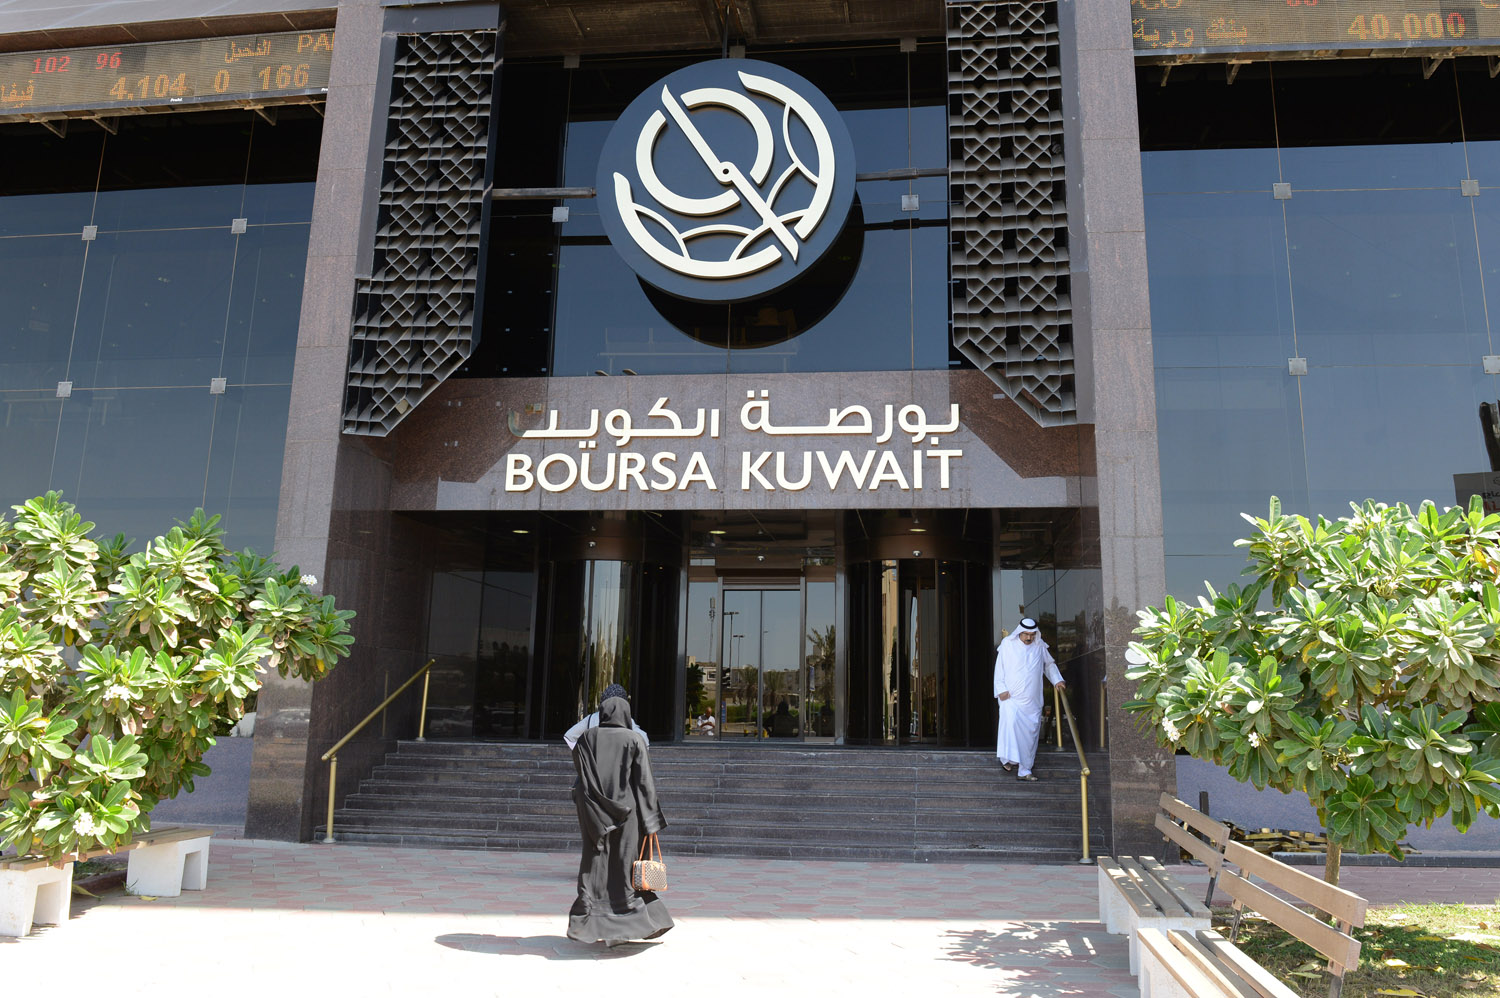 Kuwait Bourse ends trading on mix board                                                                                                                                                                                                                   